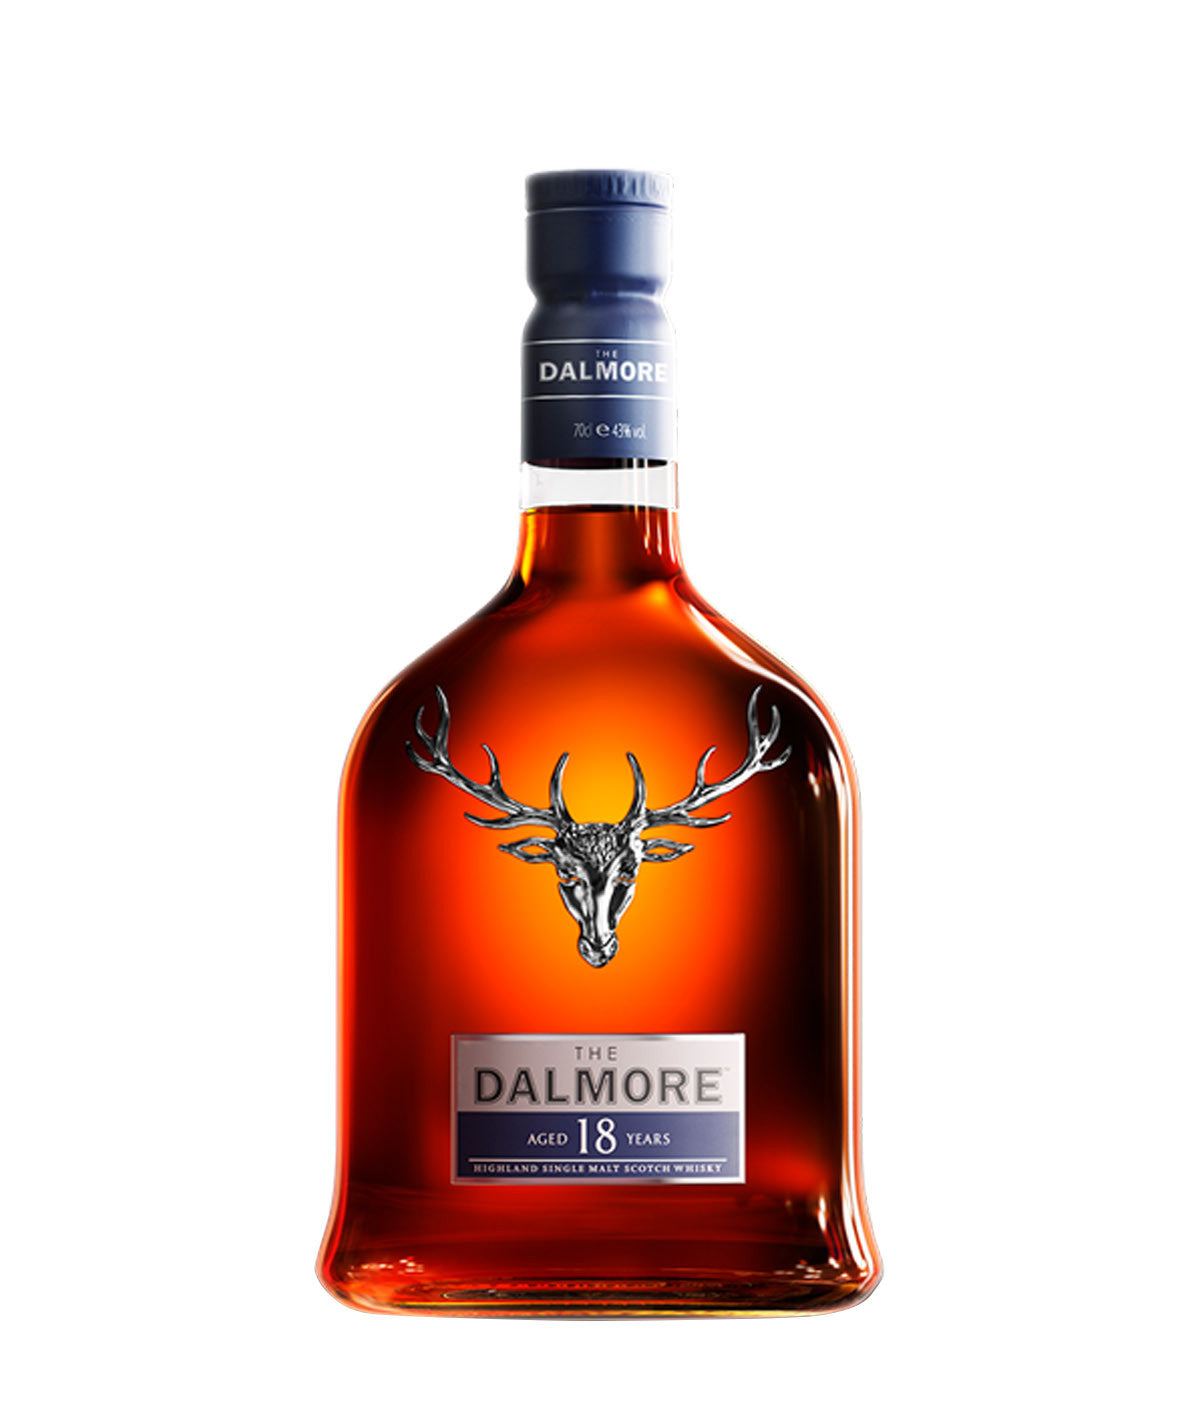 The Dalmore 18 Year old